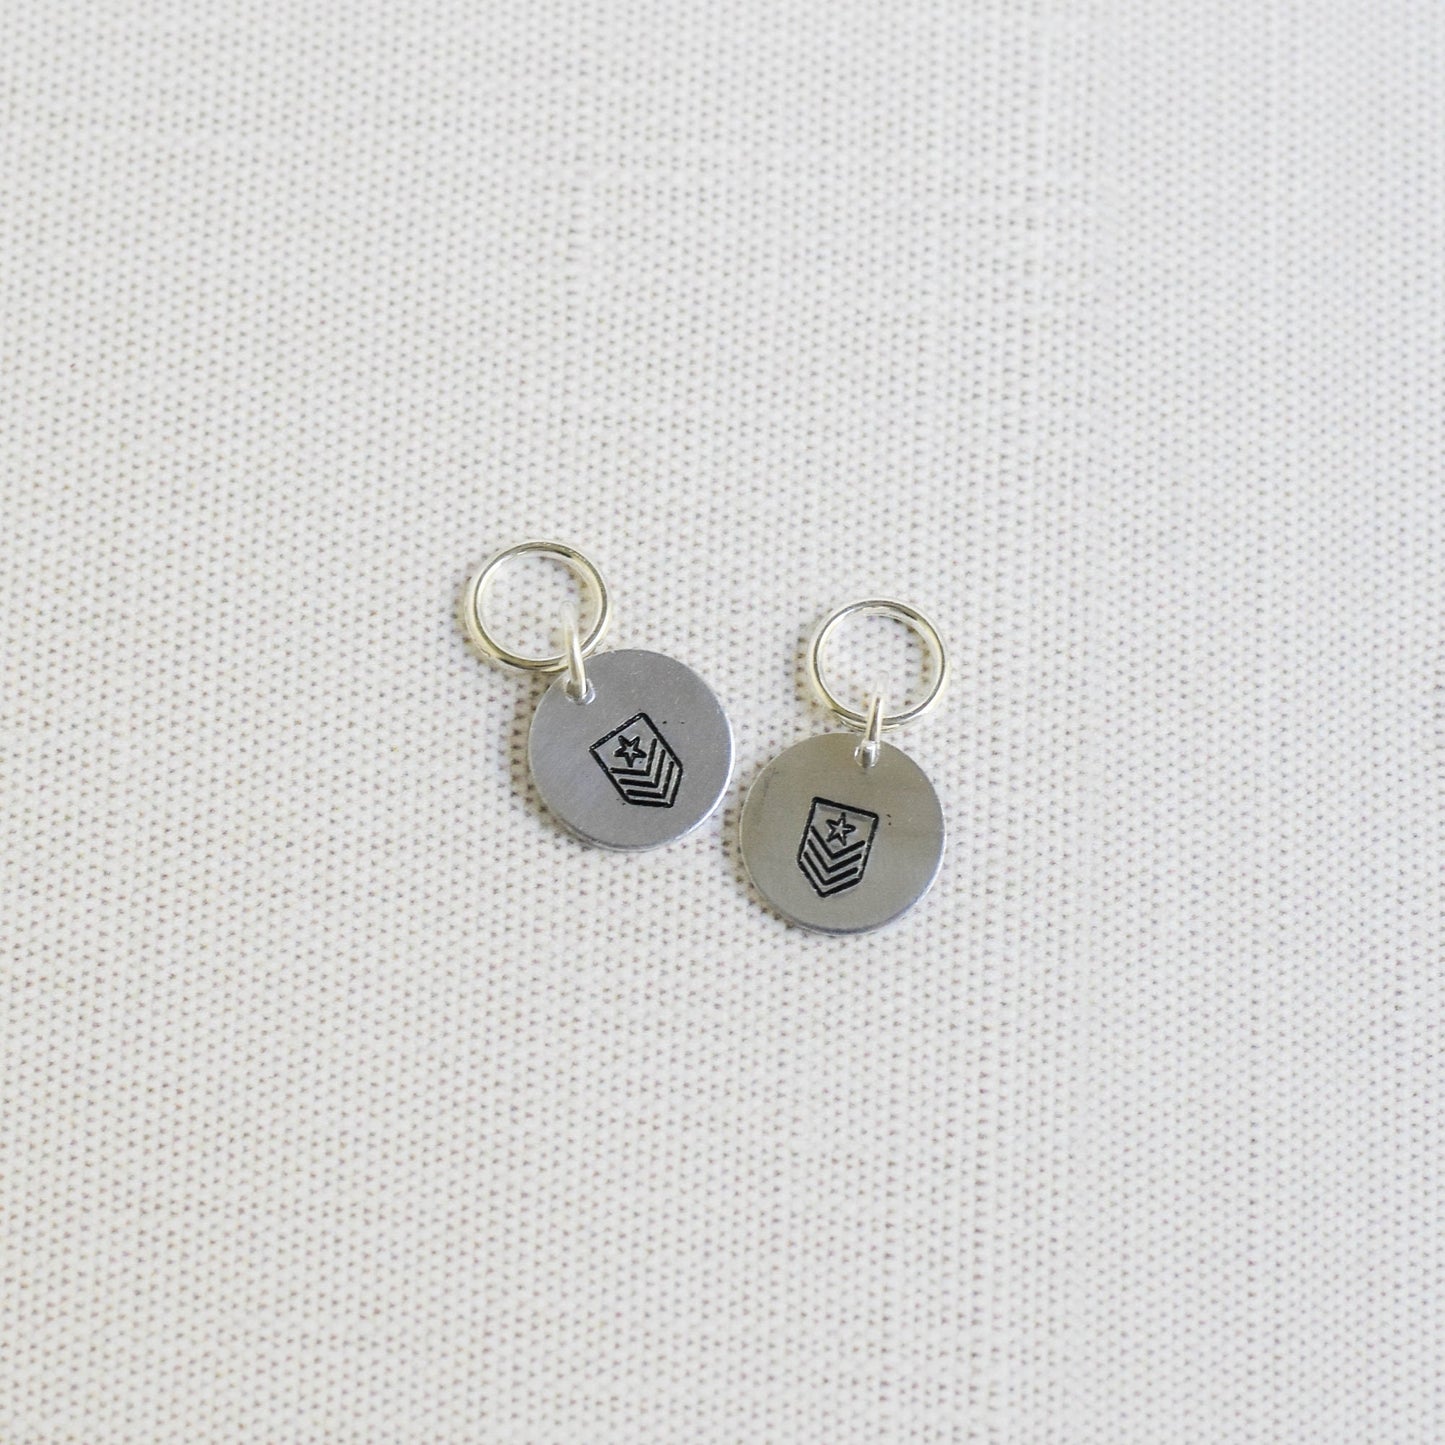 Set of 2 Hand Stamped Stitch Markers - Military